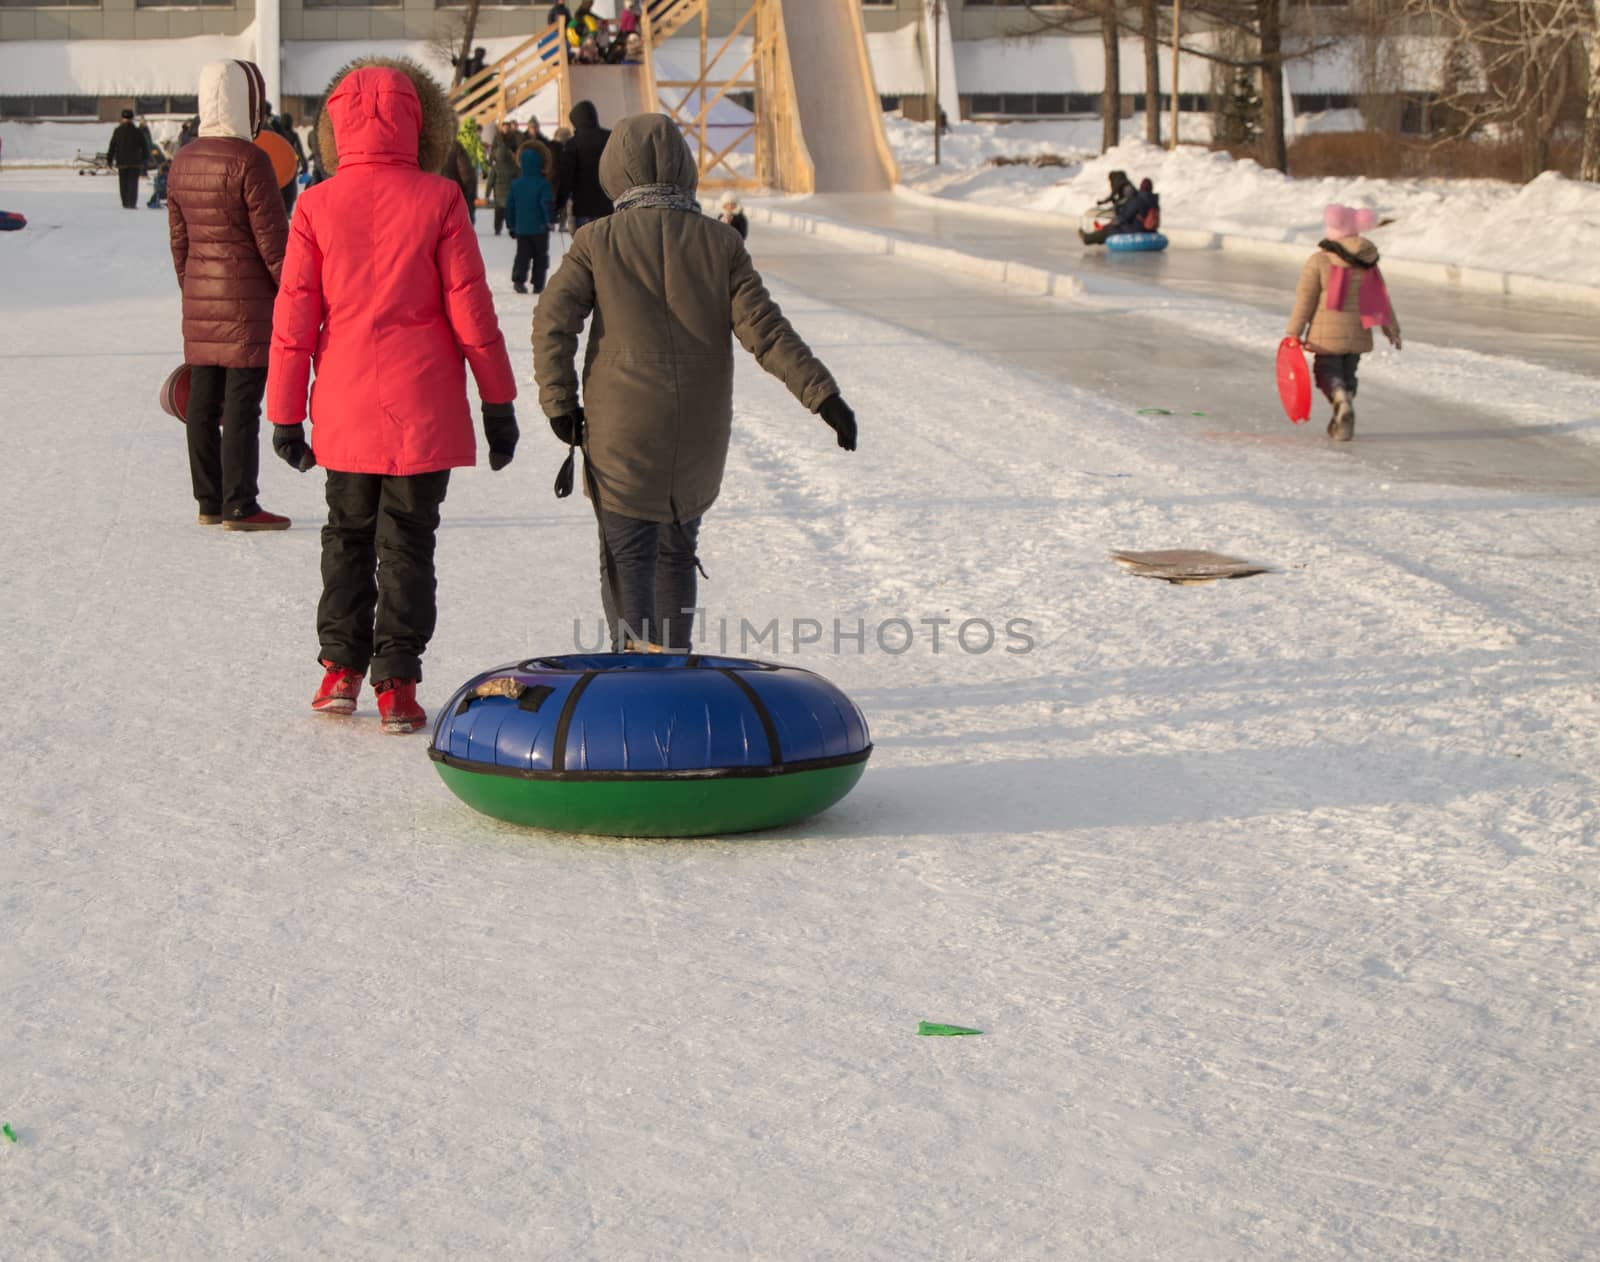 Two teen girls pull tubing after after sliding down the slope of an ice slide, winter fun in the Park by claire_lucia